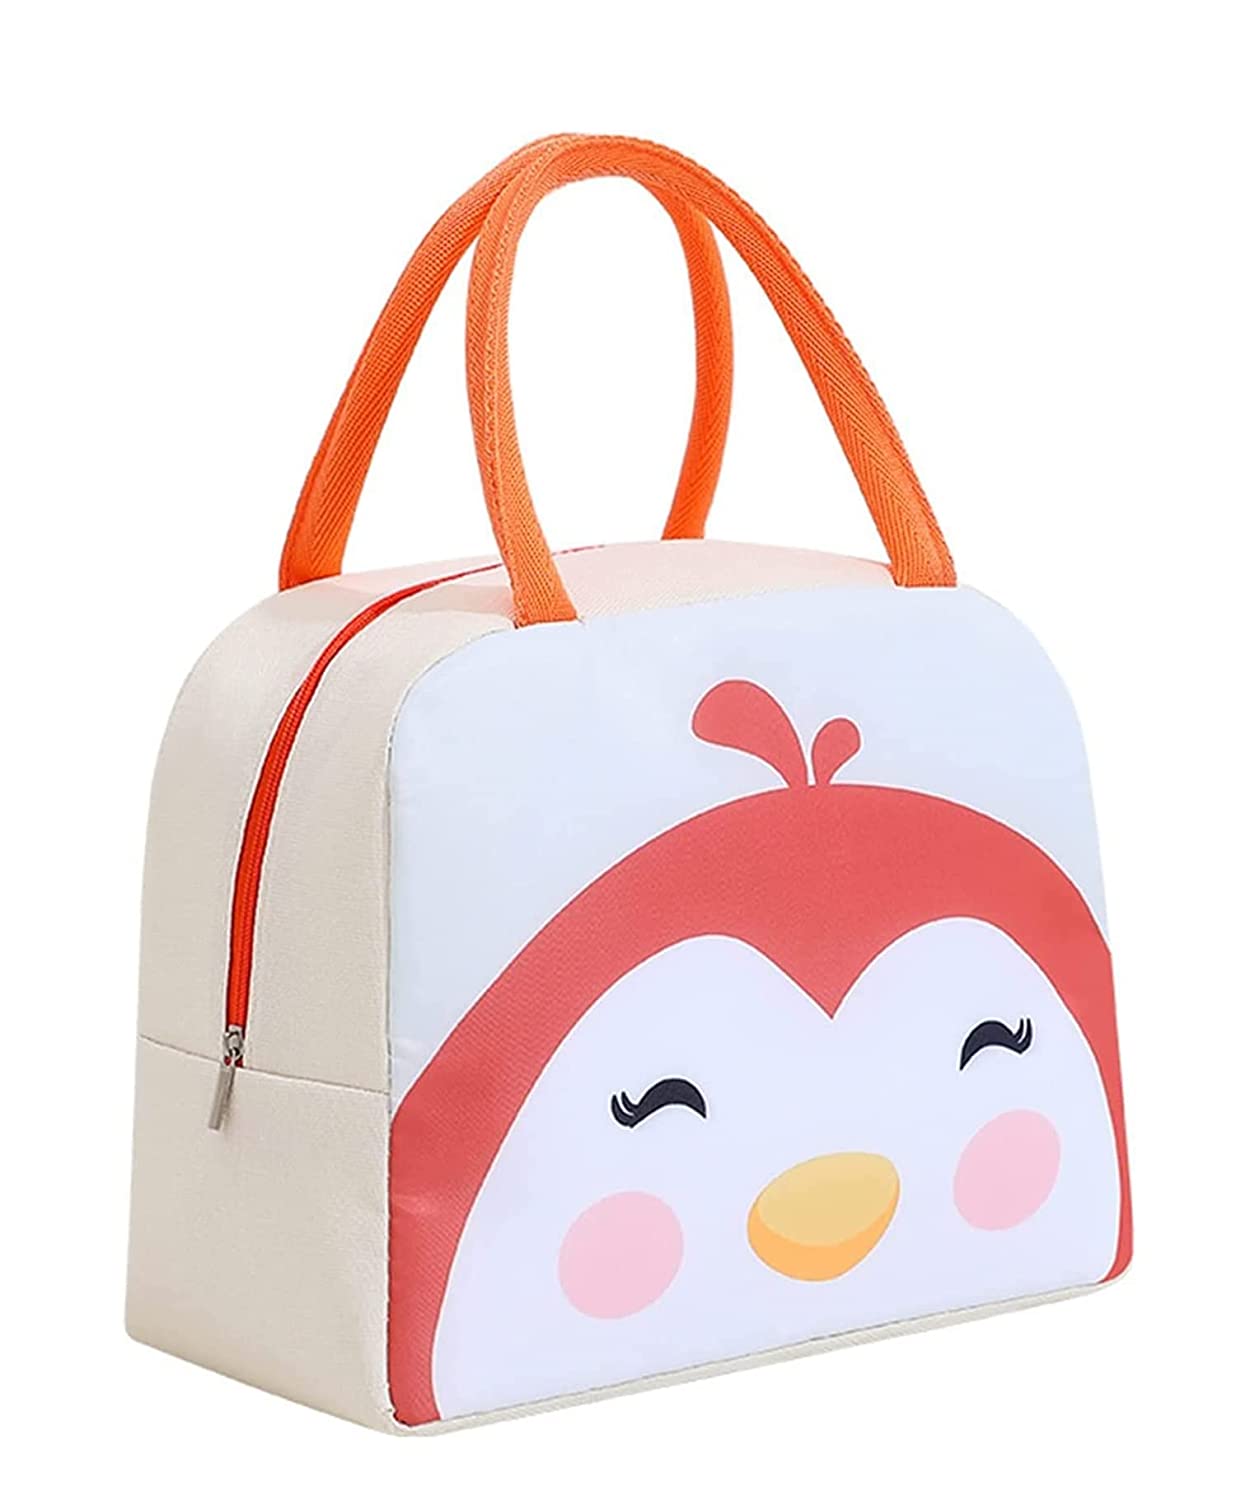 Kids Printed Insulated Reusable Lunch Bag Tote Bag